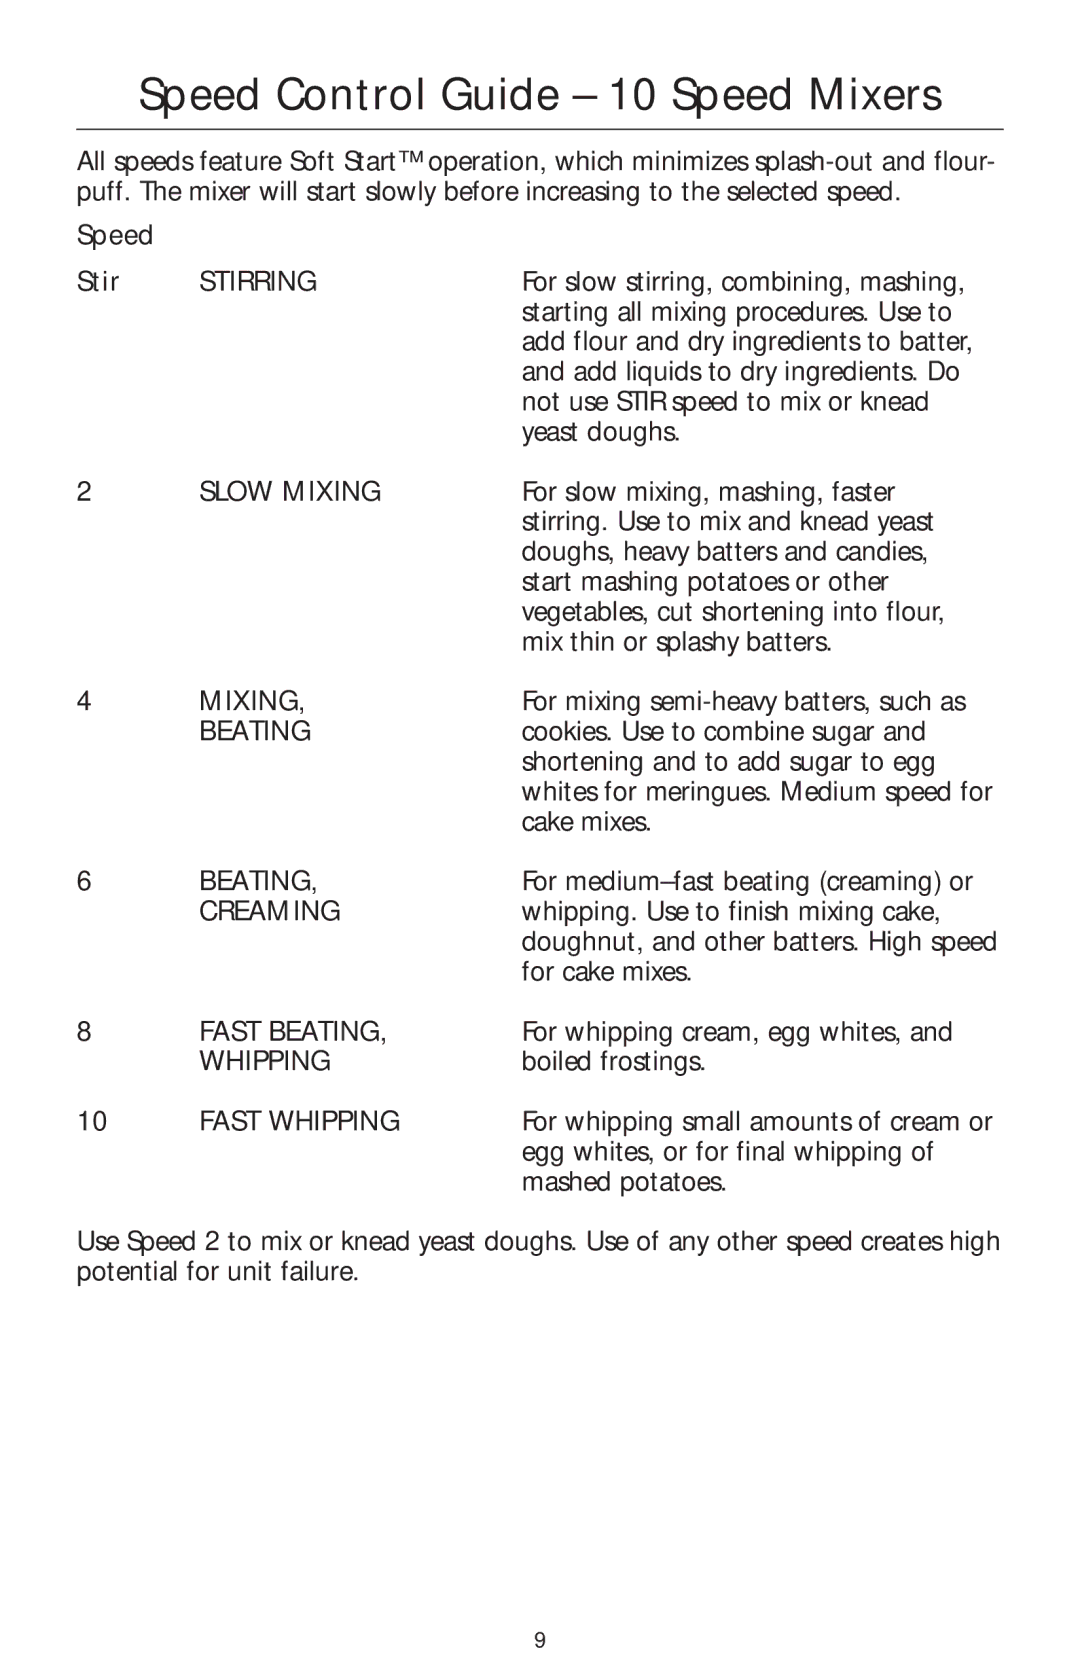 KitchenAid COMMERCIAL MIXER manual Speed Control Guide 10 Speed Mixers 